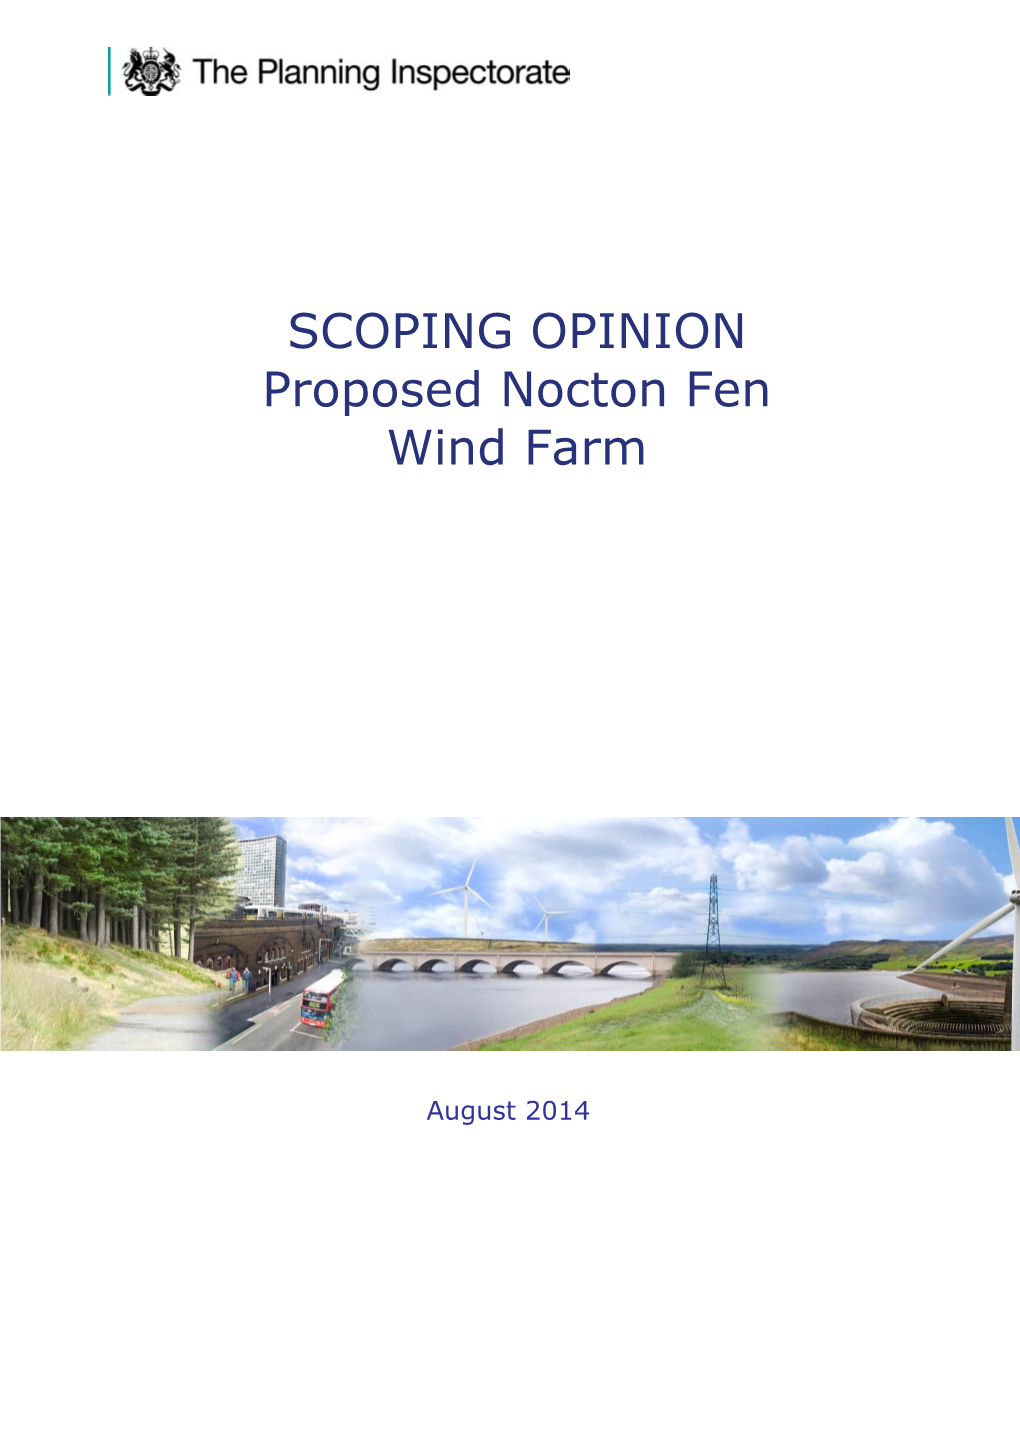 SCOPING OPINION Proposed Nocton Fen Wind Farm